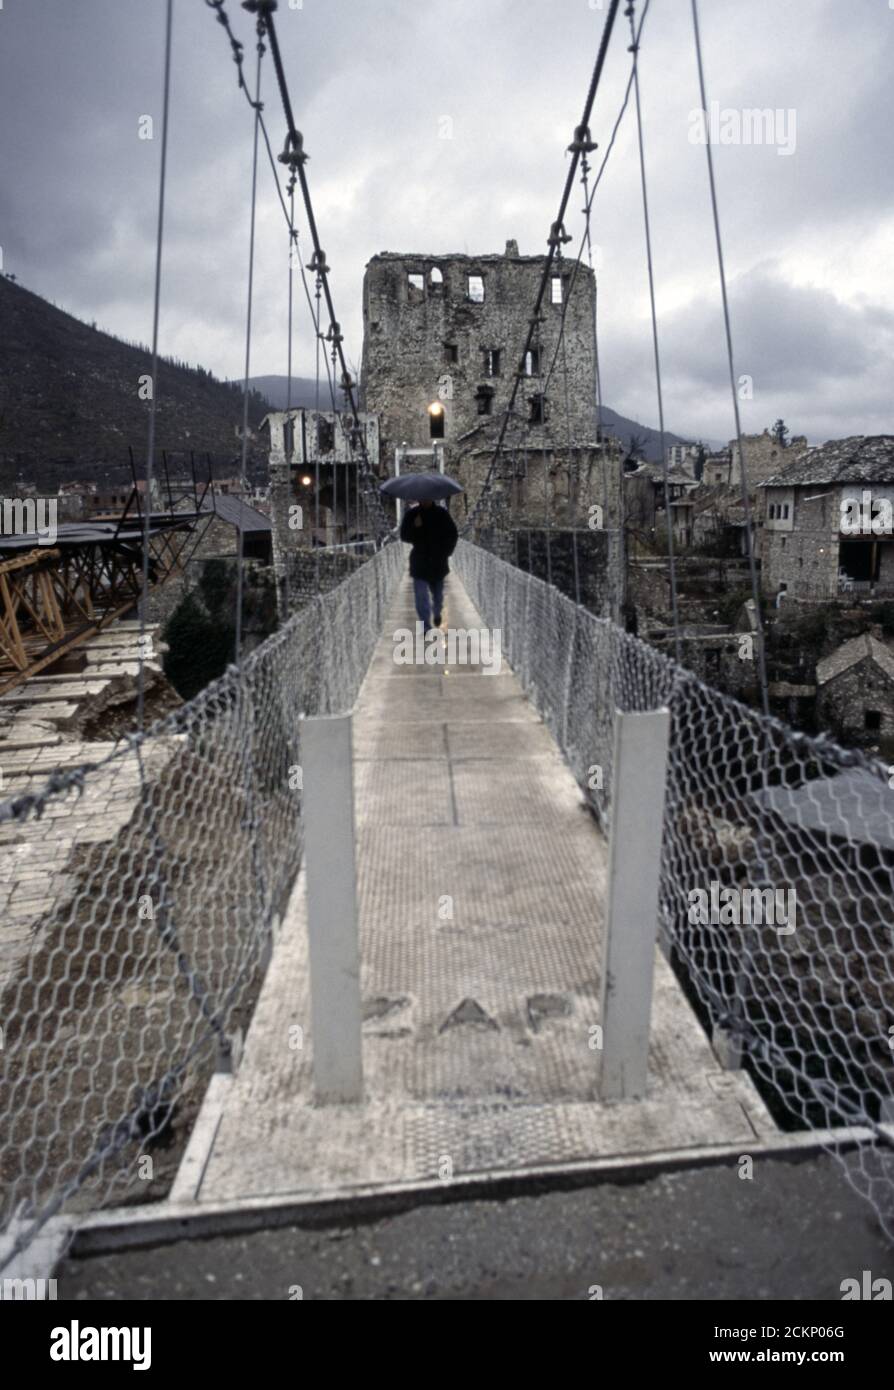 6th December 1995 During the war in Bosnia: a man crosses a cable footbridge that replaced the Stari Most (Old Bridge), over the Neretva River in Mostar. Stock Photo